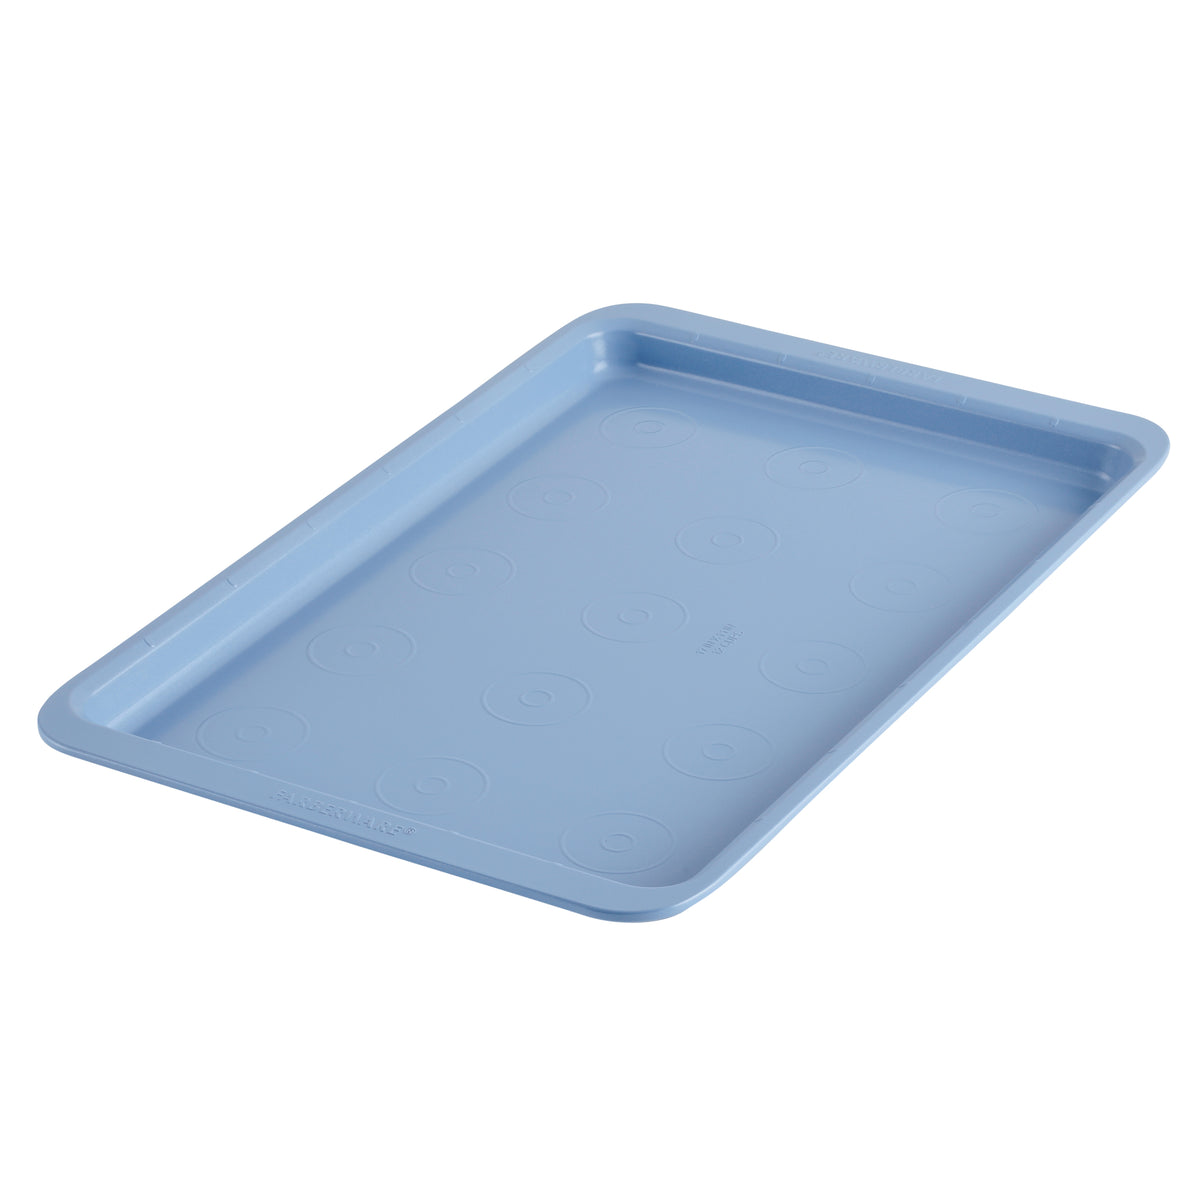 Farberware Easy Solutions 11 inch x 17 inch Nonstick Bakeware Cookie Pan Baking Sheet, Blue